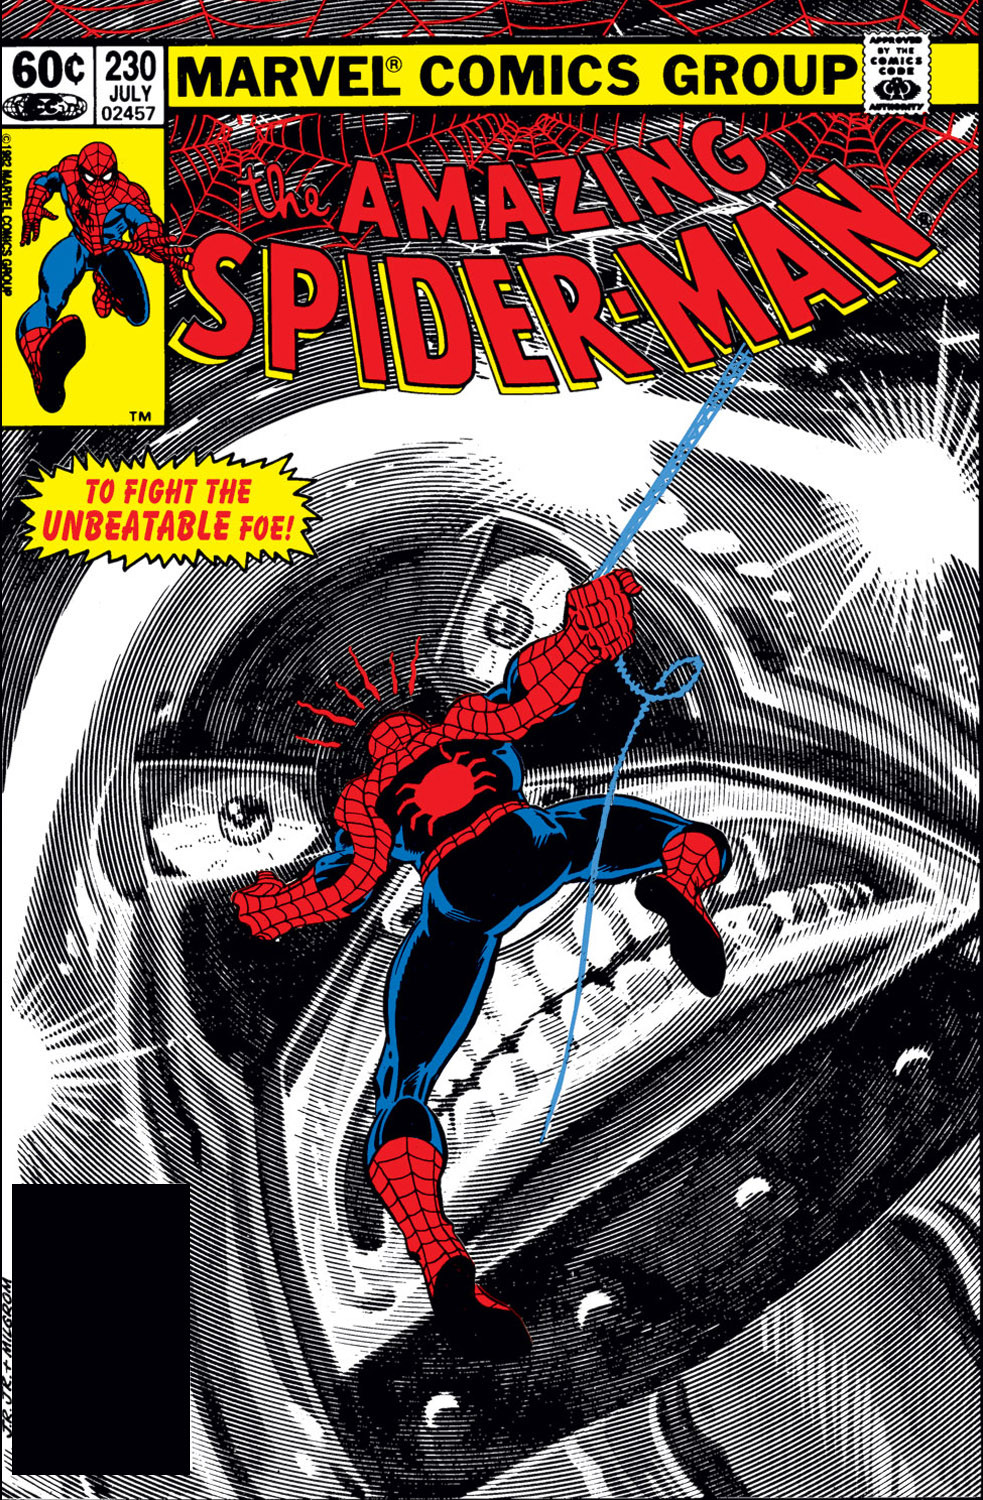 Judging by the Cover - Our favorite Spider-Man covers of all time